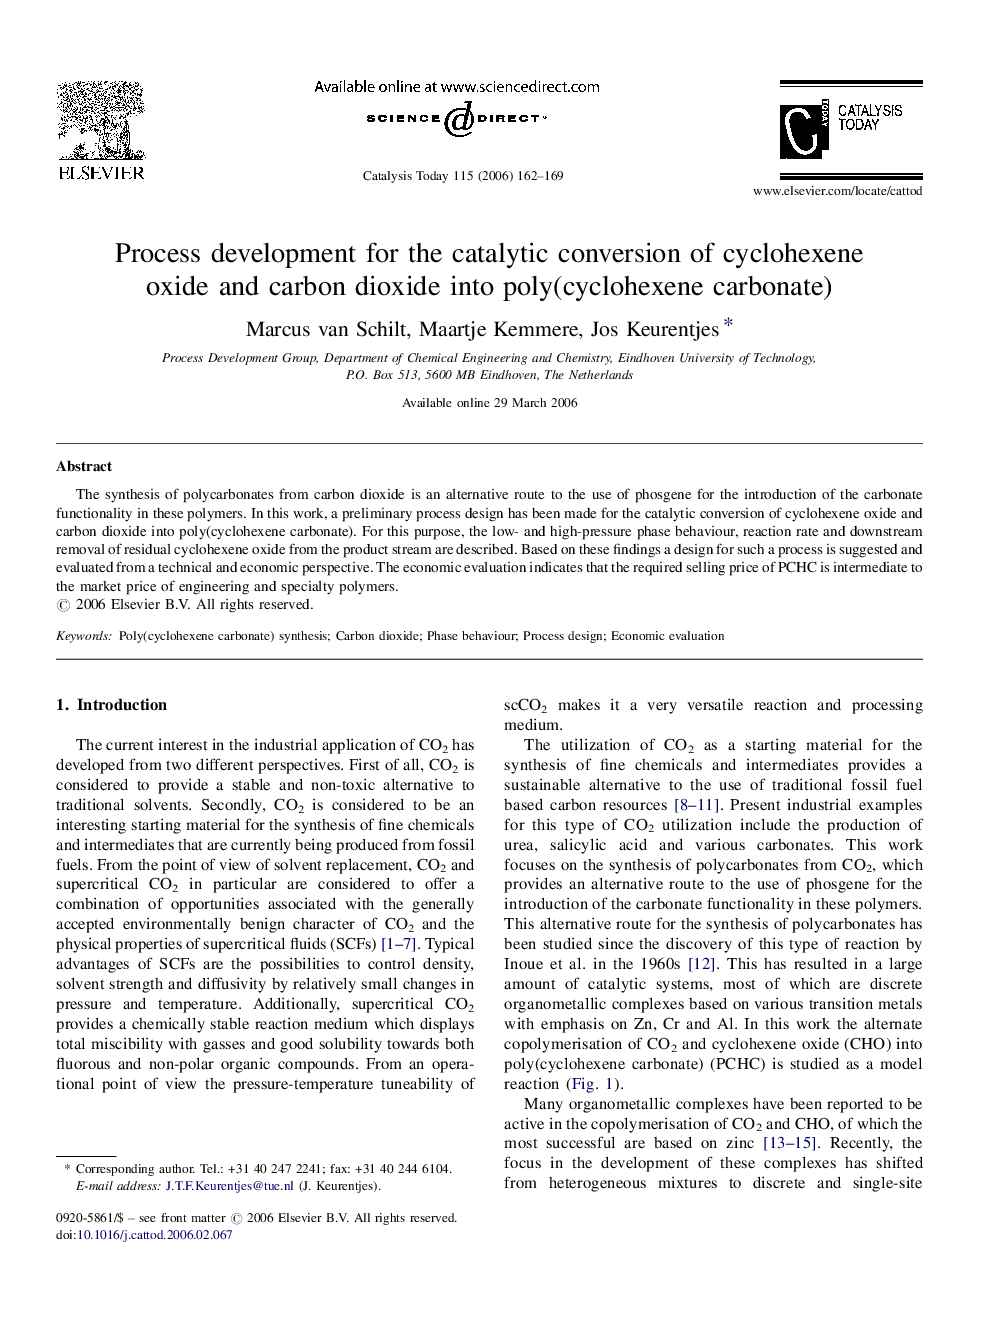 Process development for the catalytic conversion of cyclohexene oxide and carbon dioxide into poly(cyclohexene carbonate)